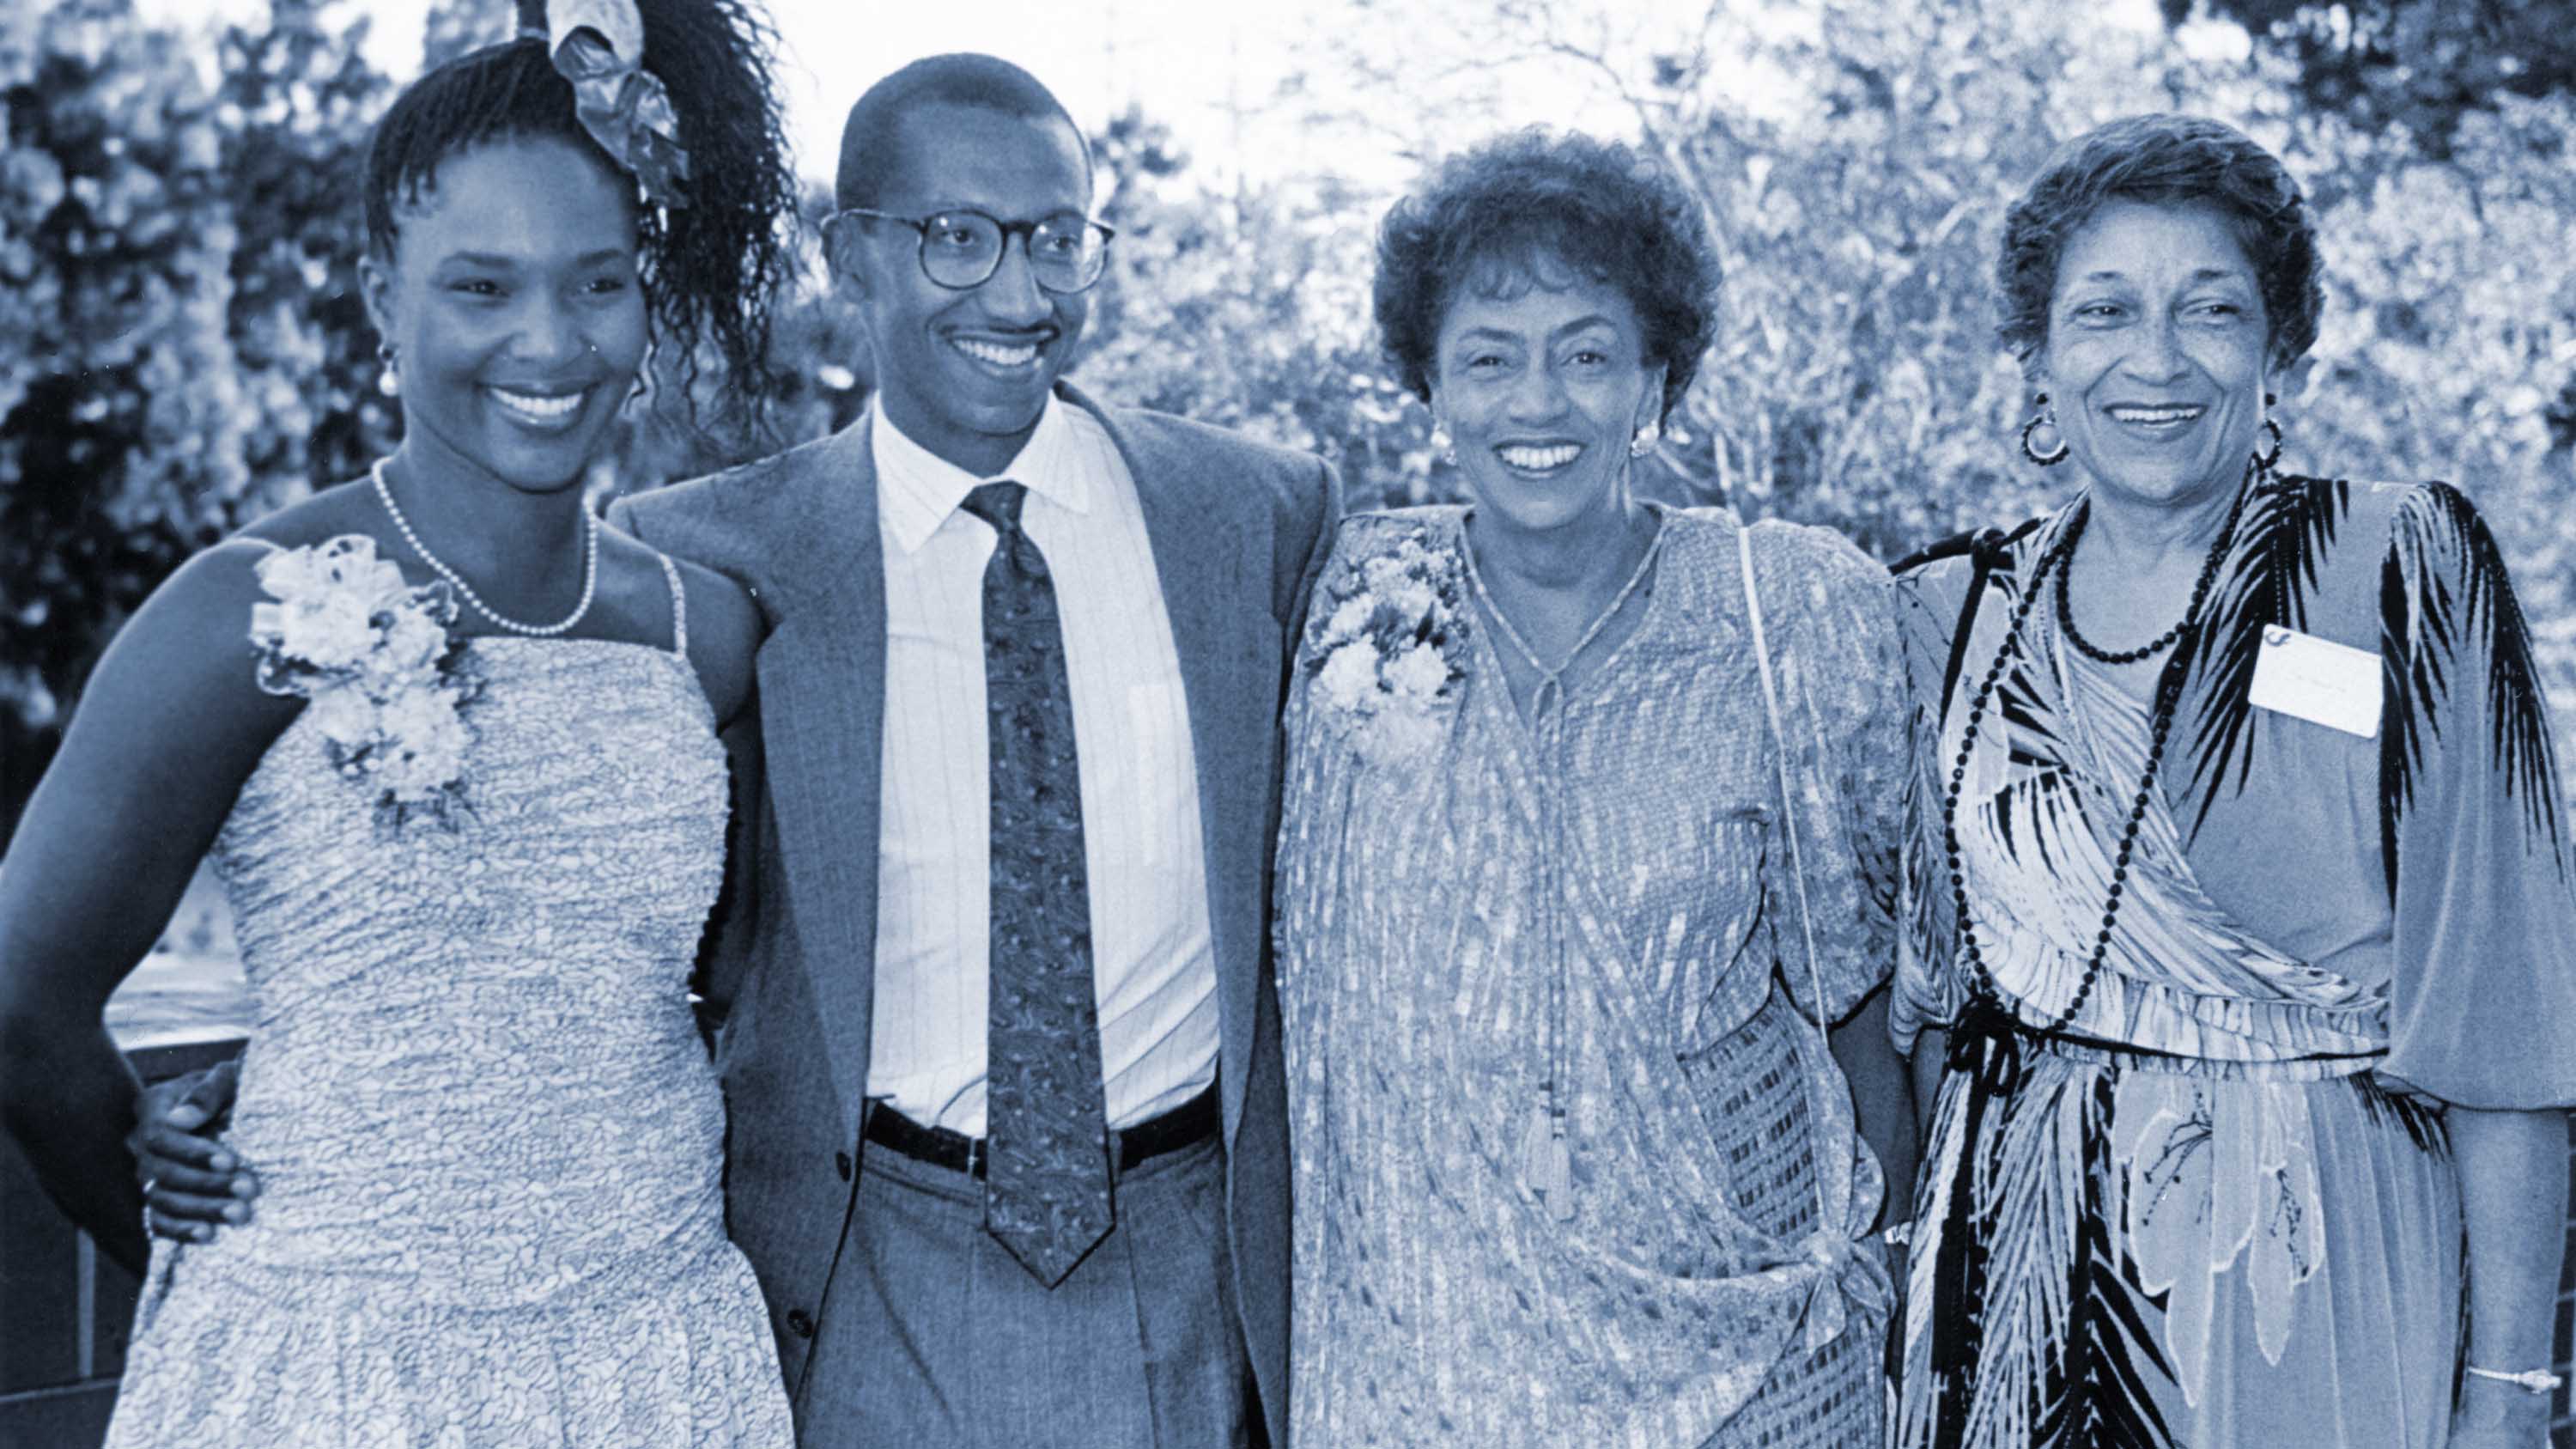 Jewel Plummer Cobb, second from right, is pictured with family and friends during a farewell reception held in honor of her retirement from California State University, Fullerton, on June 3, 1990.